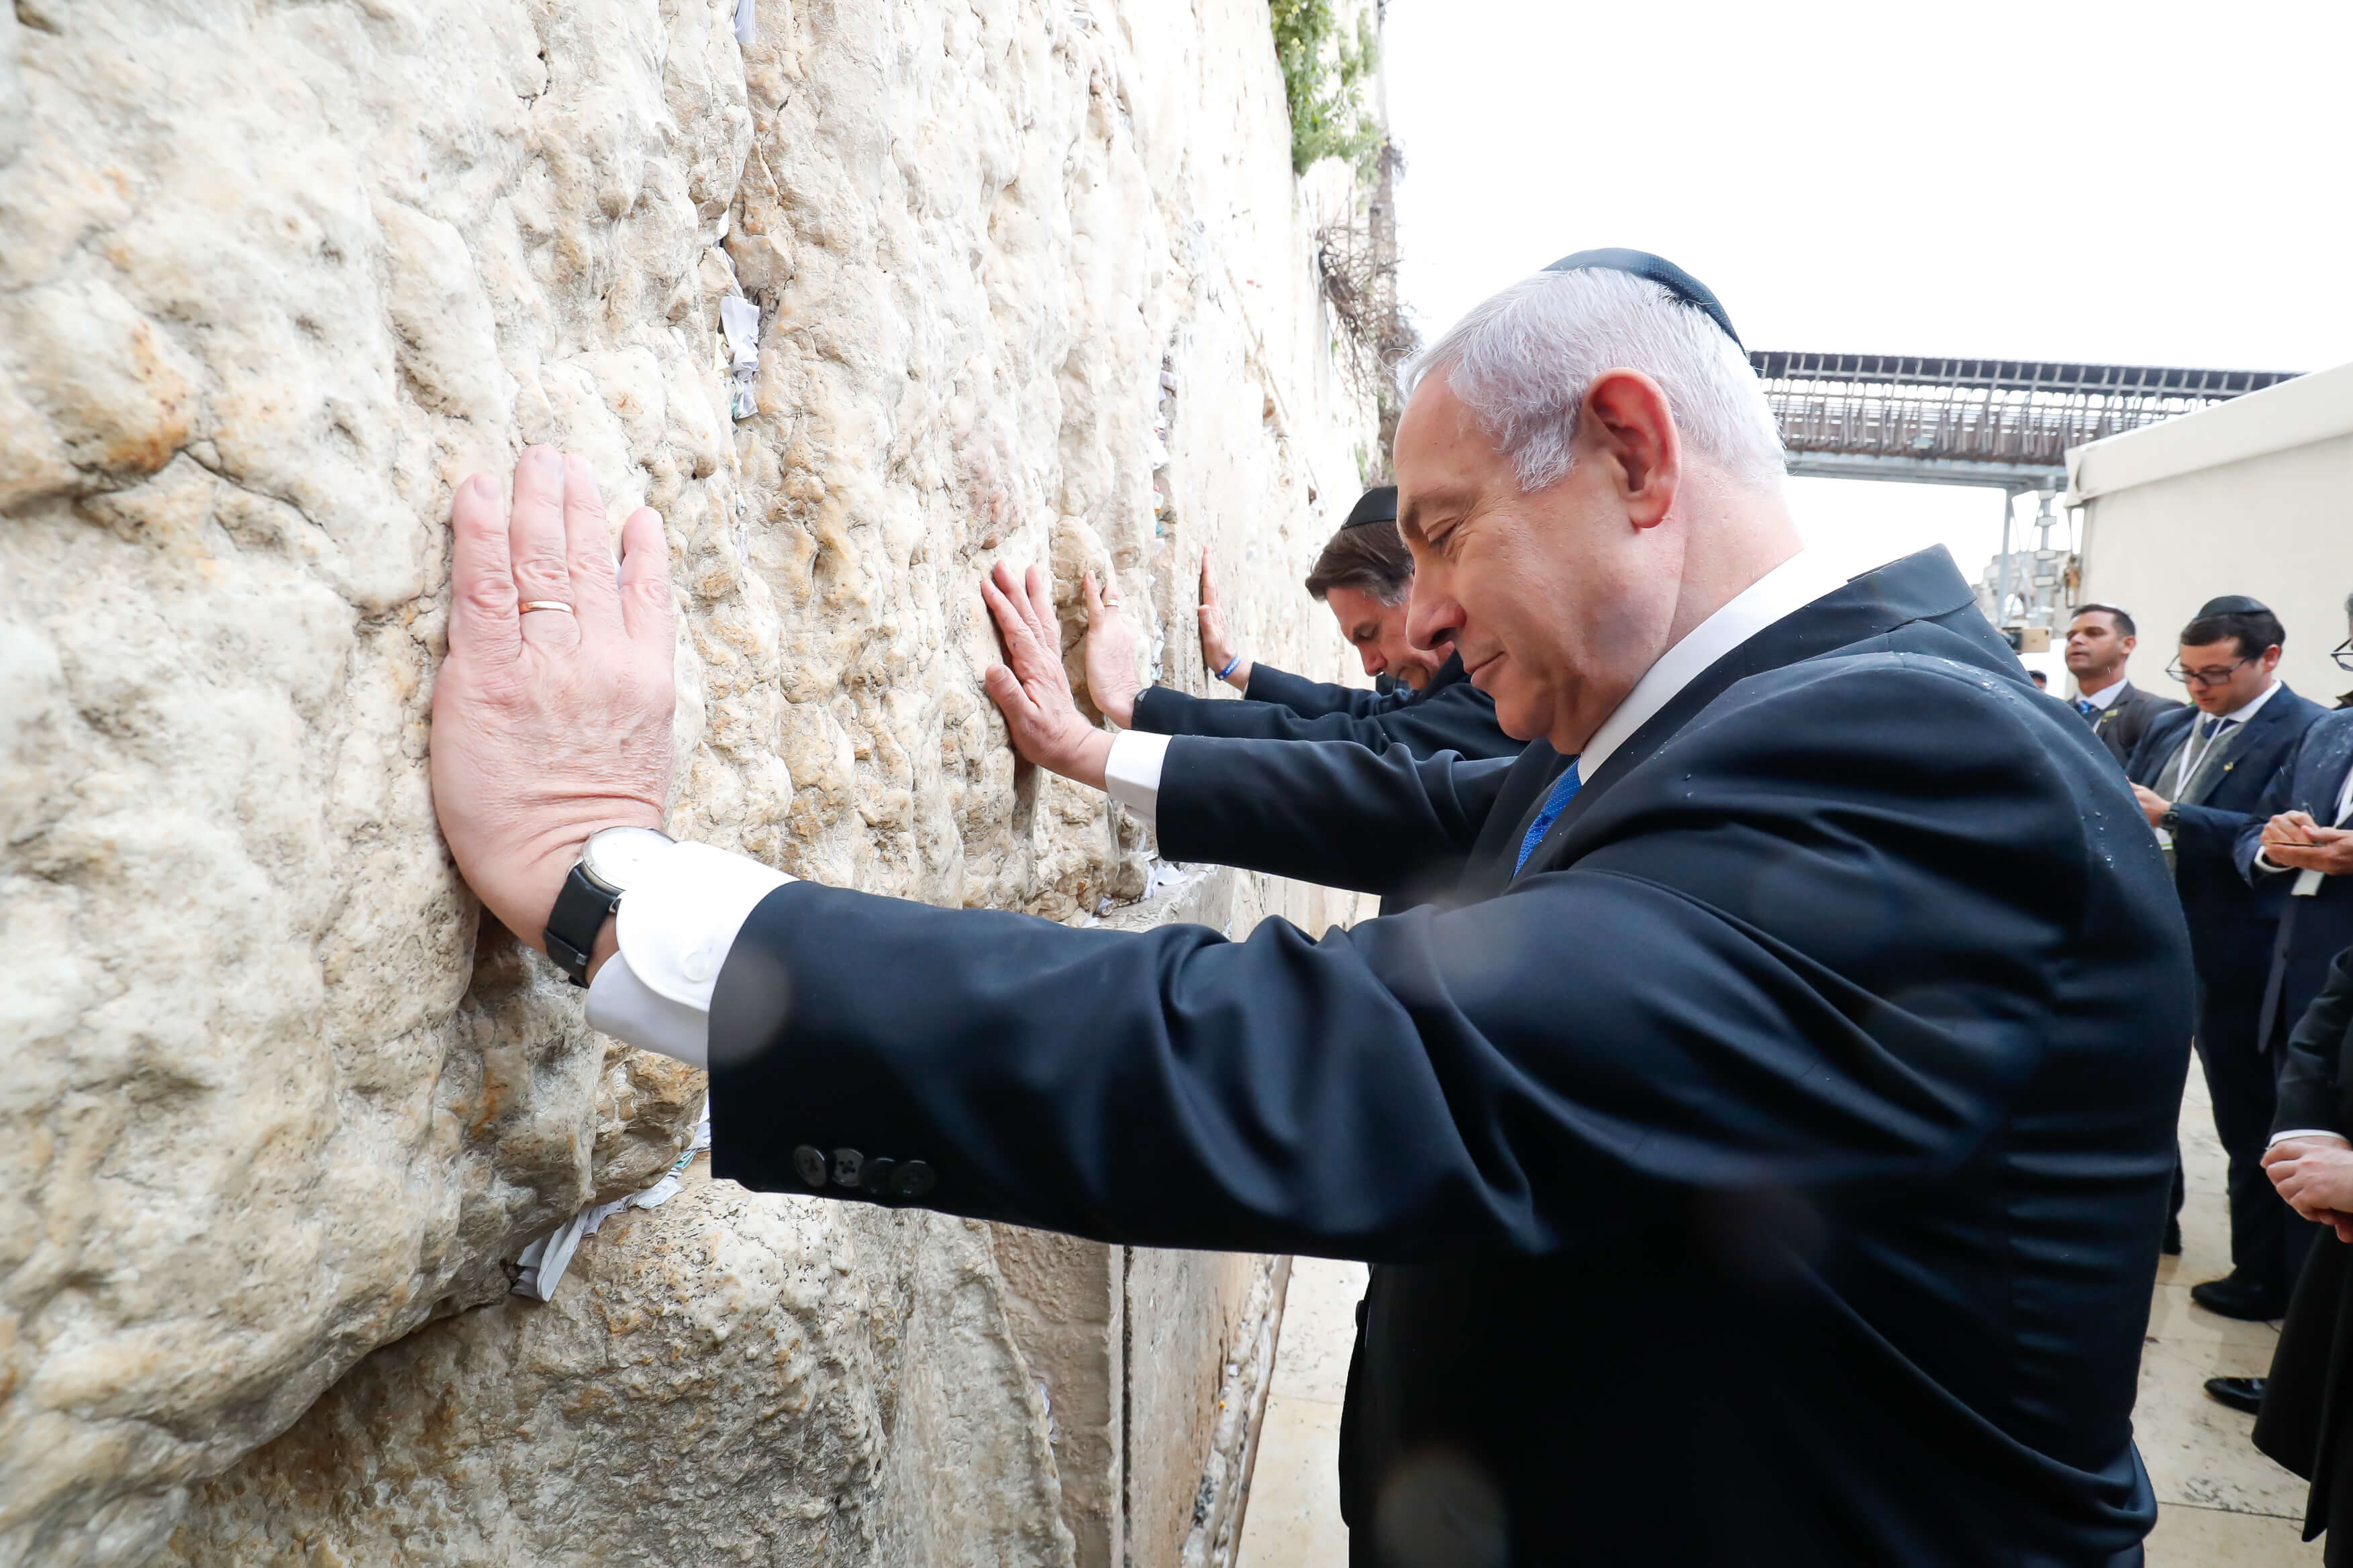 Re-elected Prime Minister Netanyahu visits the wailing wall in April 2019. ©Flickr/Palácio do Planalto